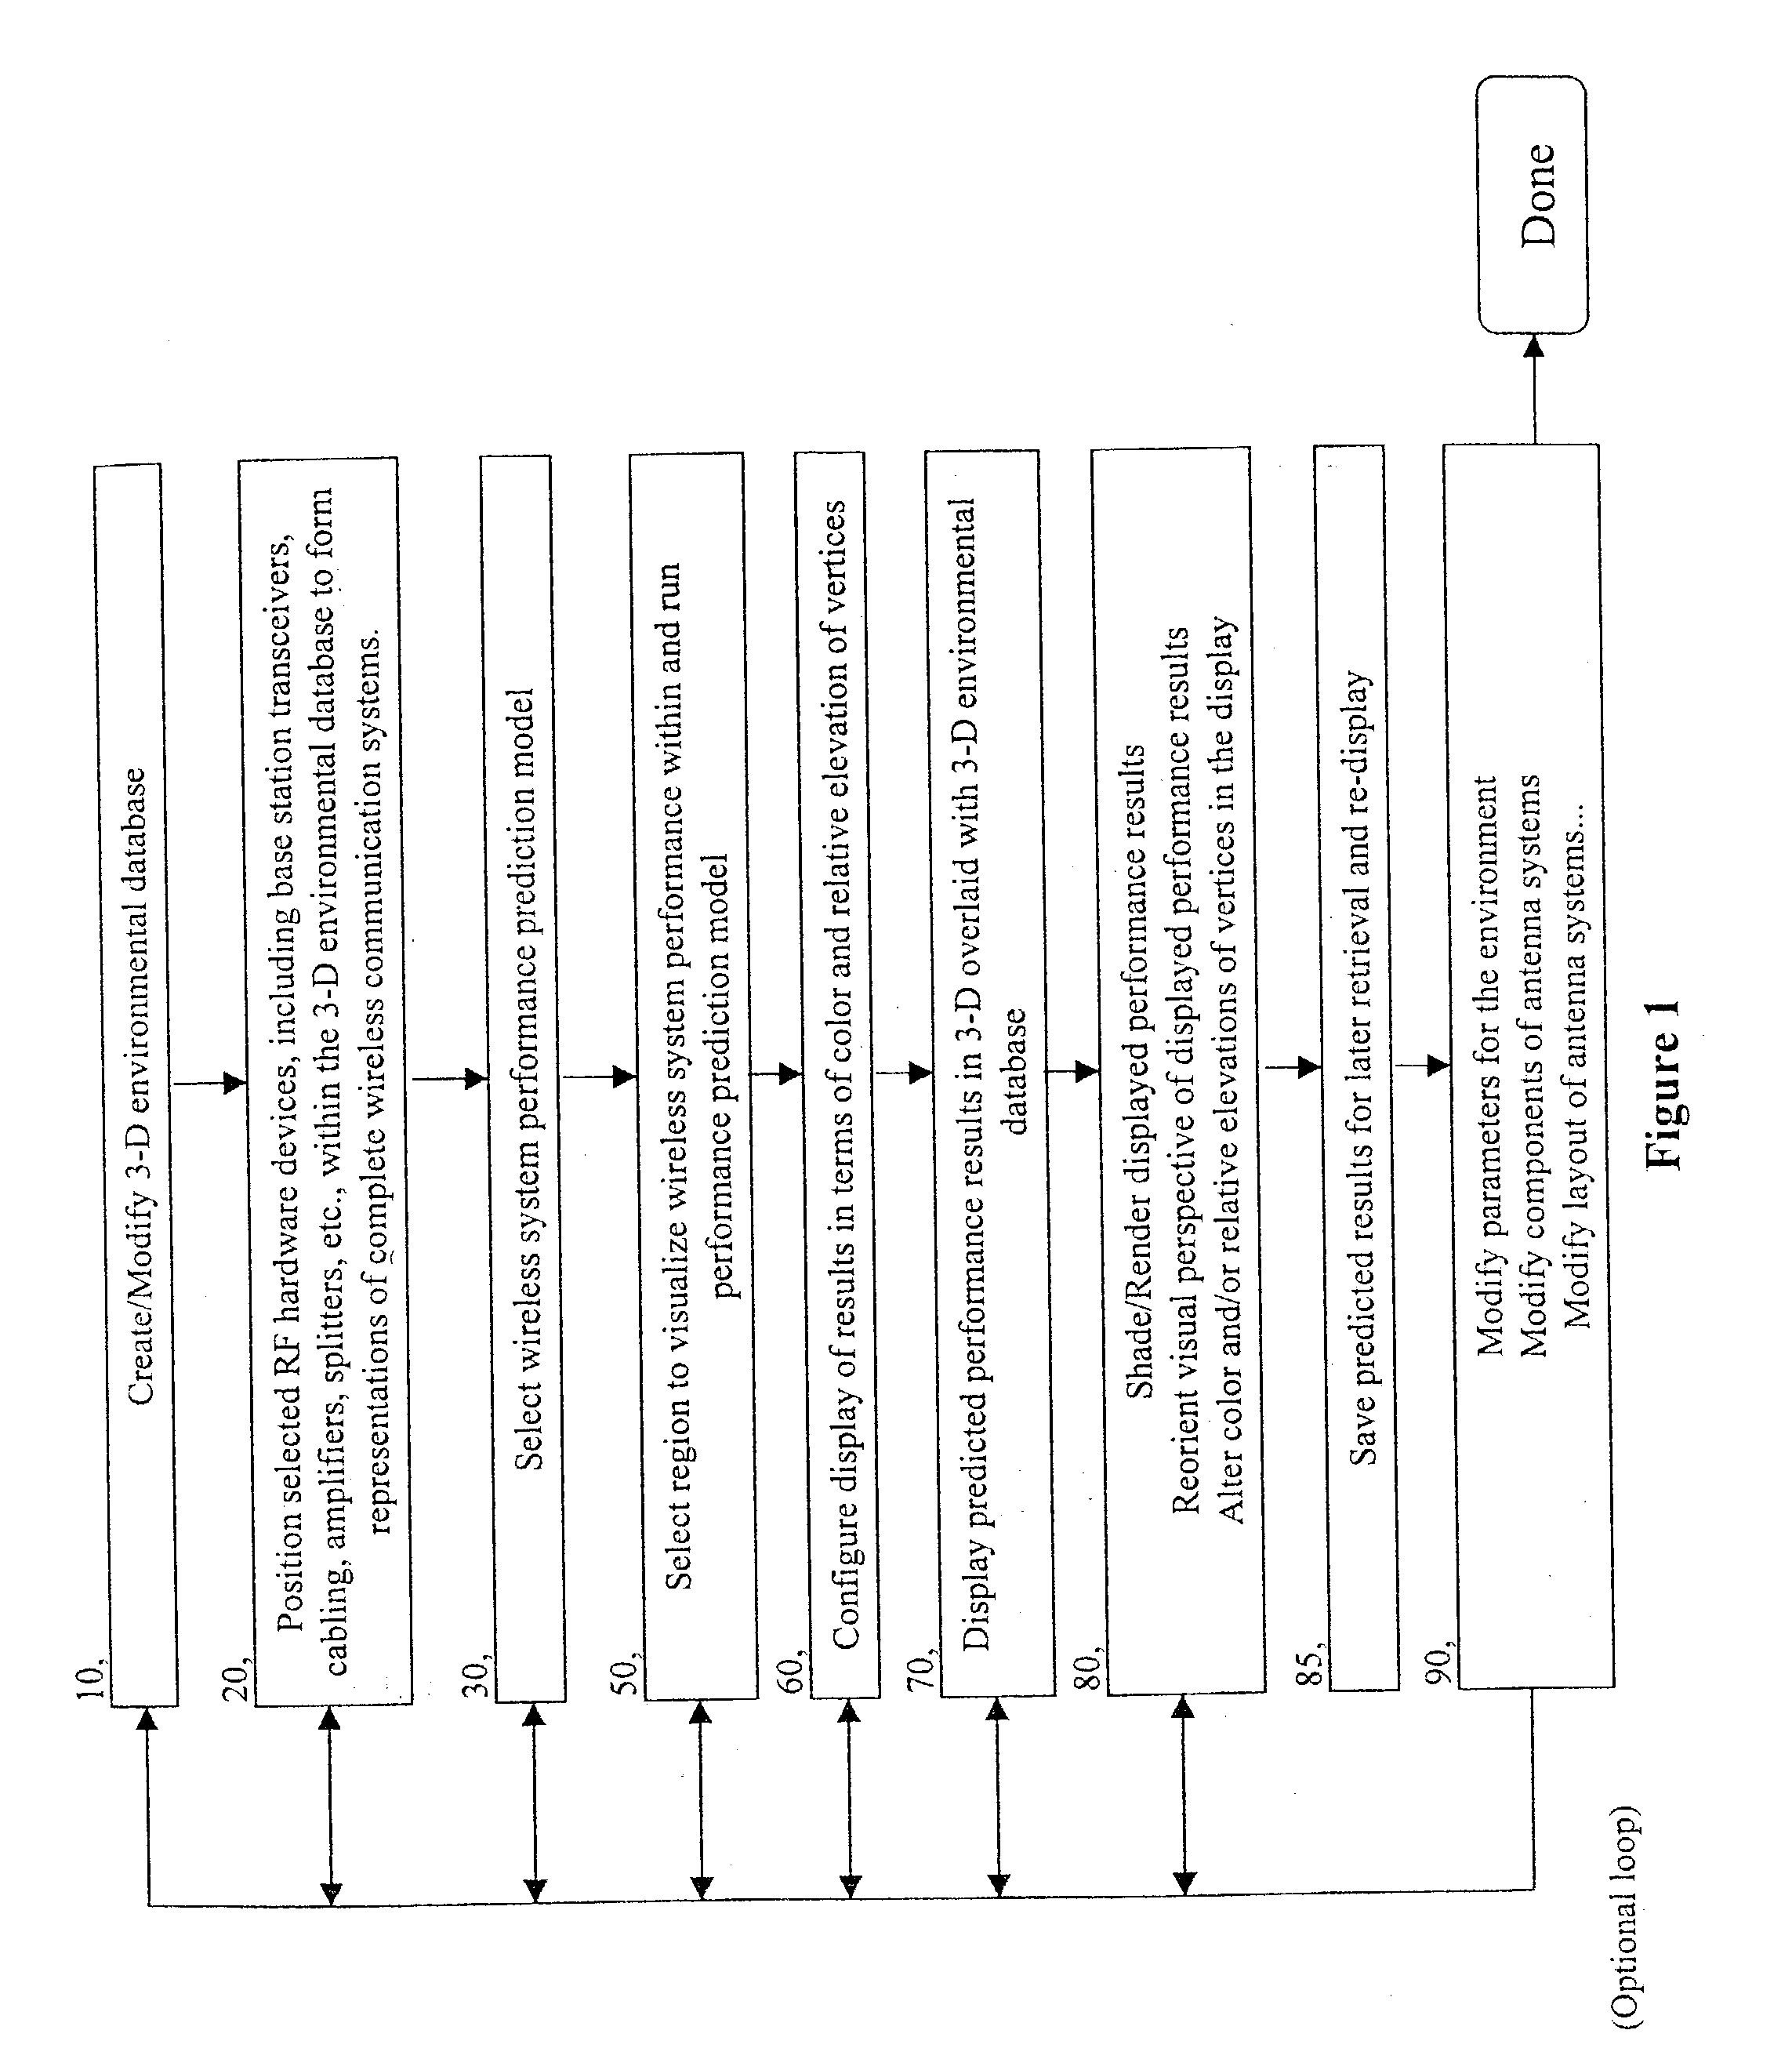 Method and system for displaying network performance, cost, maintenance, and infrastructure wiring diagram